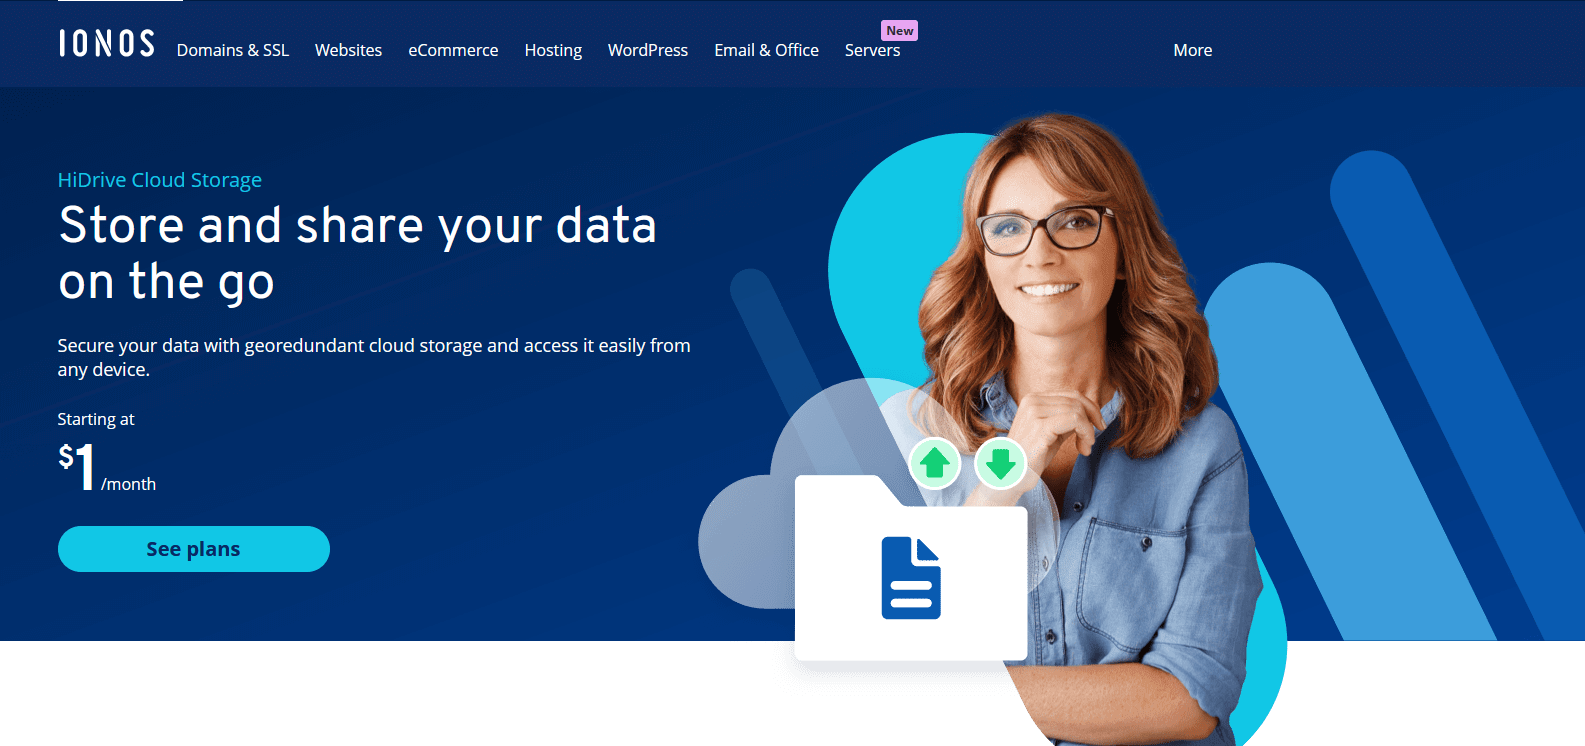 HiDrive offers a range of plans to store and share your data